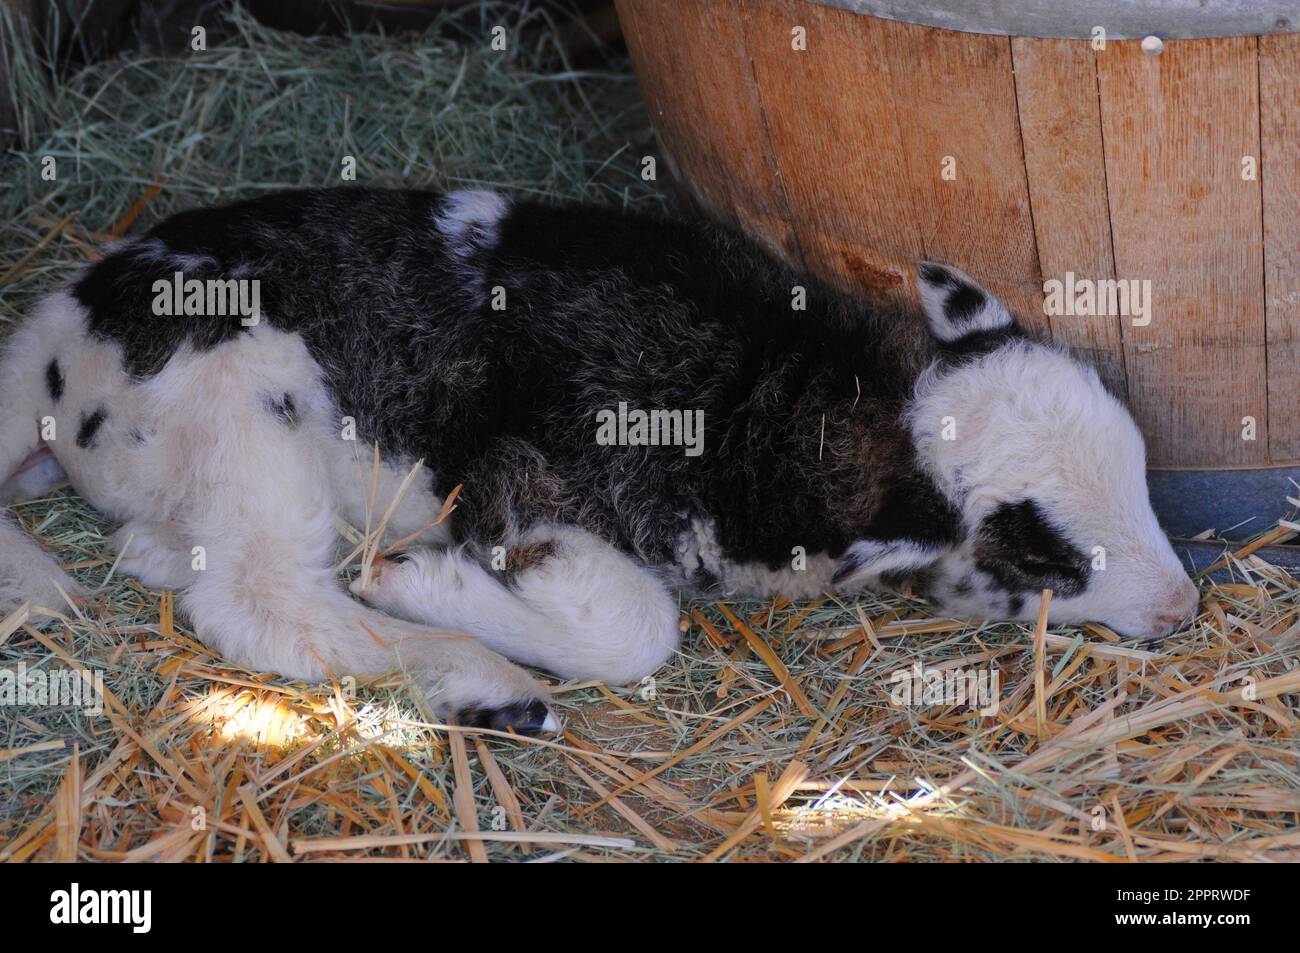 Closeup portrait of a black and white baby sheep sleeping Stock Photo